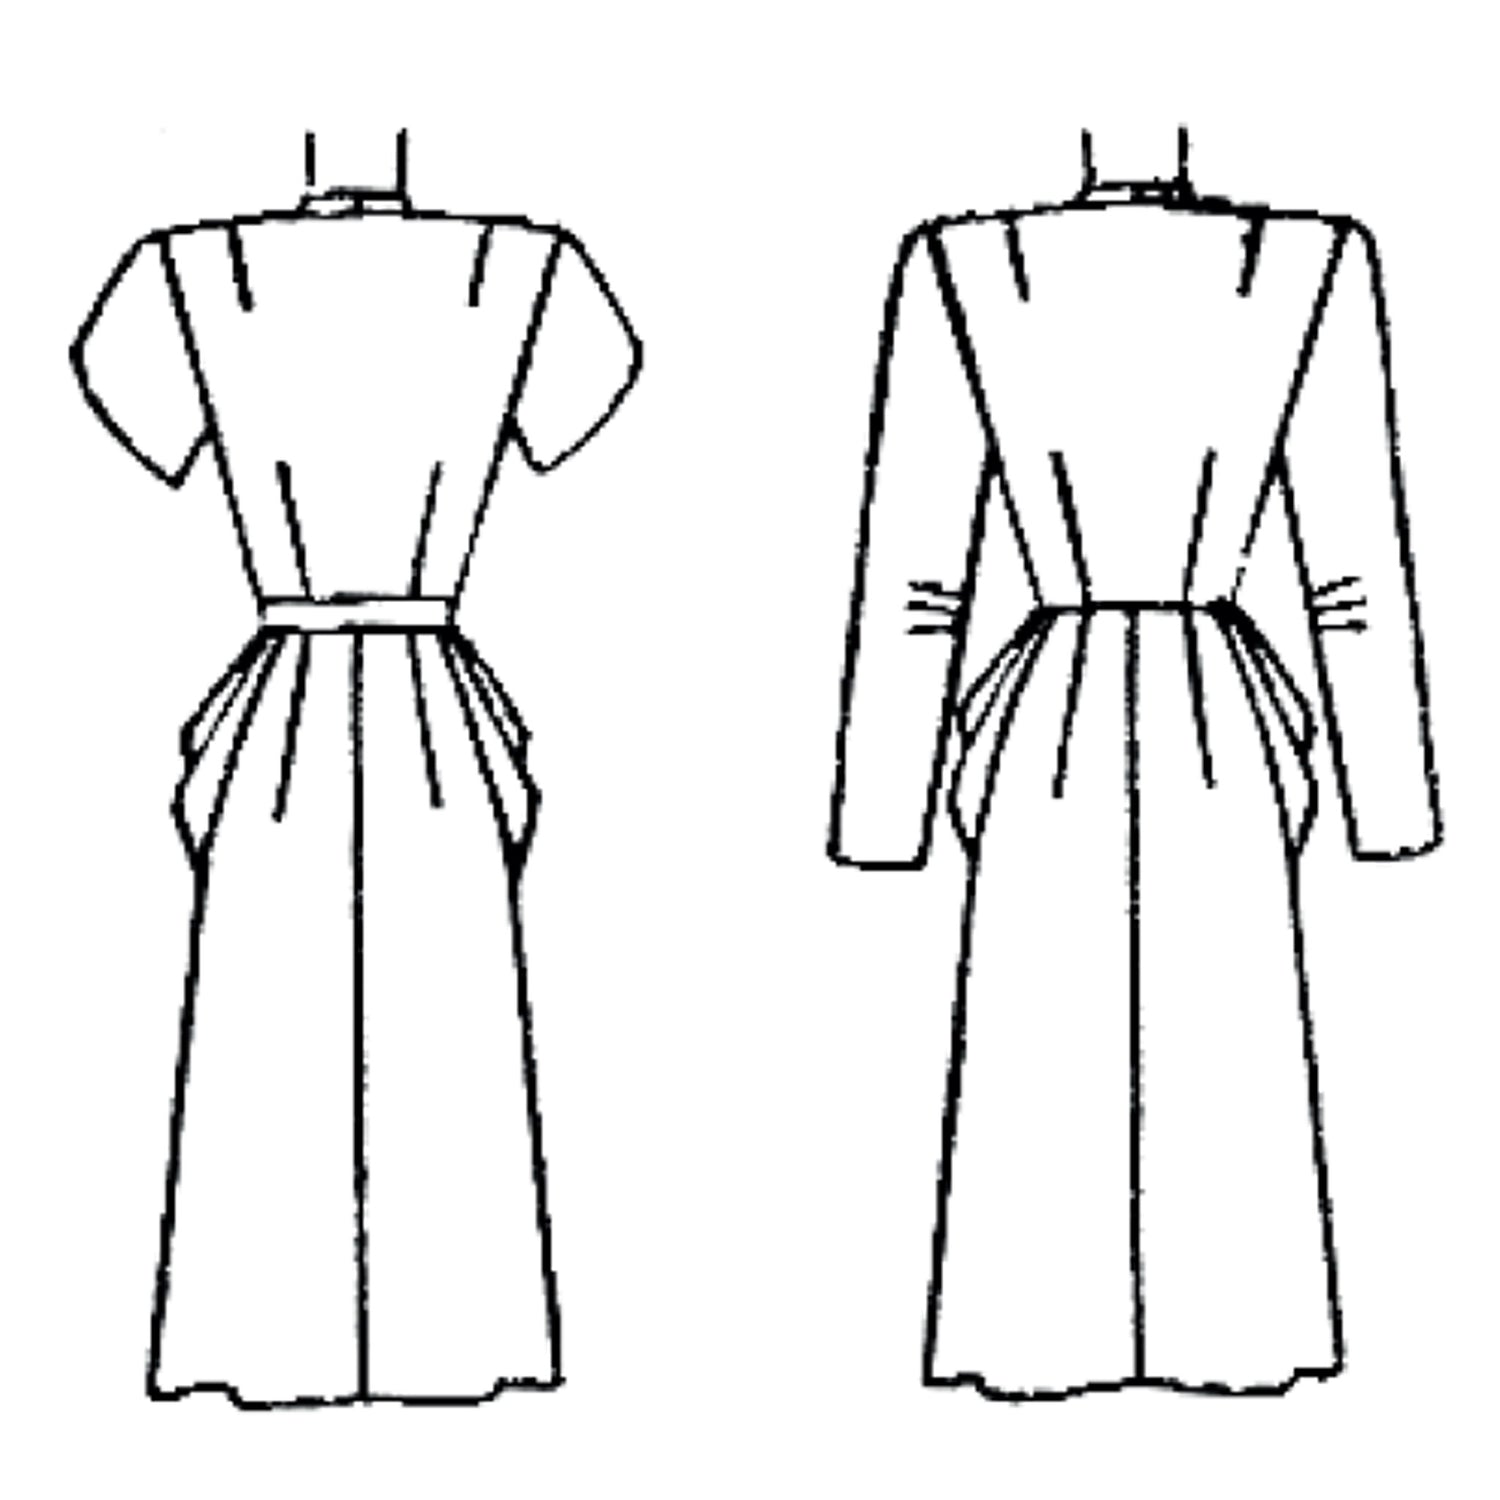 back views of back of dress with long and short sleeves